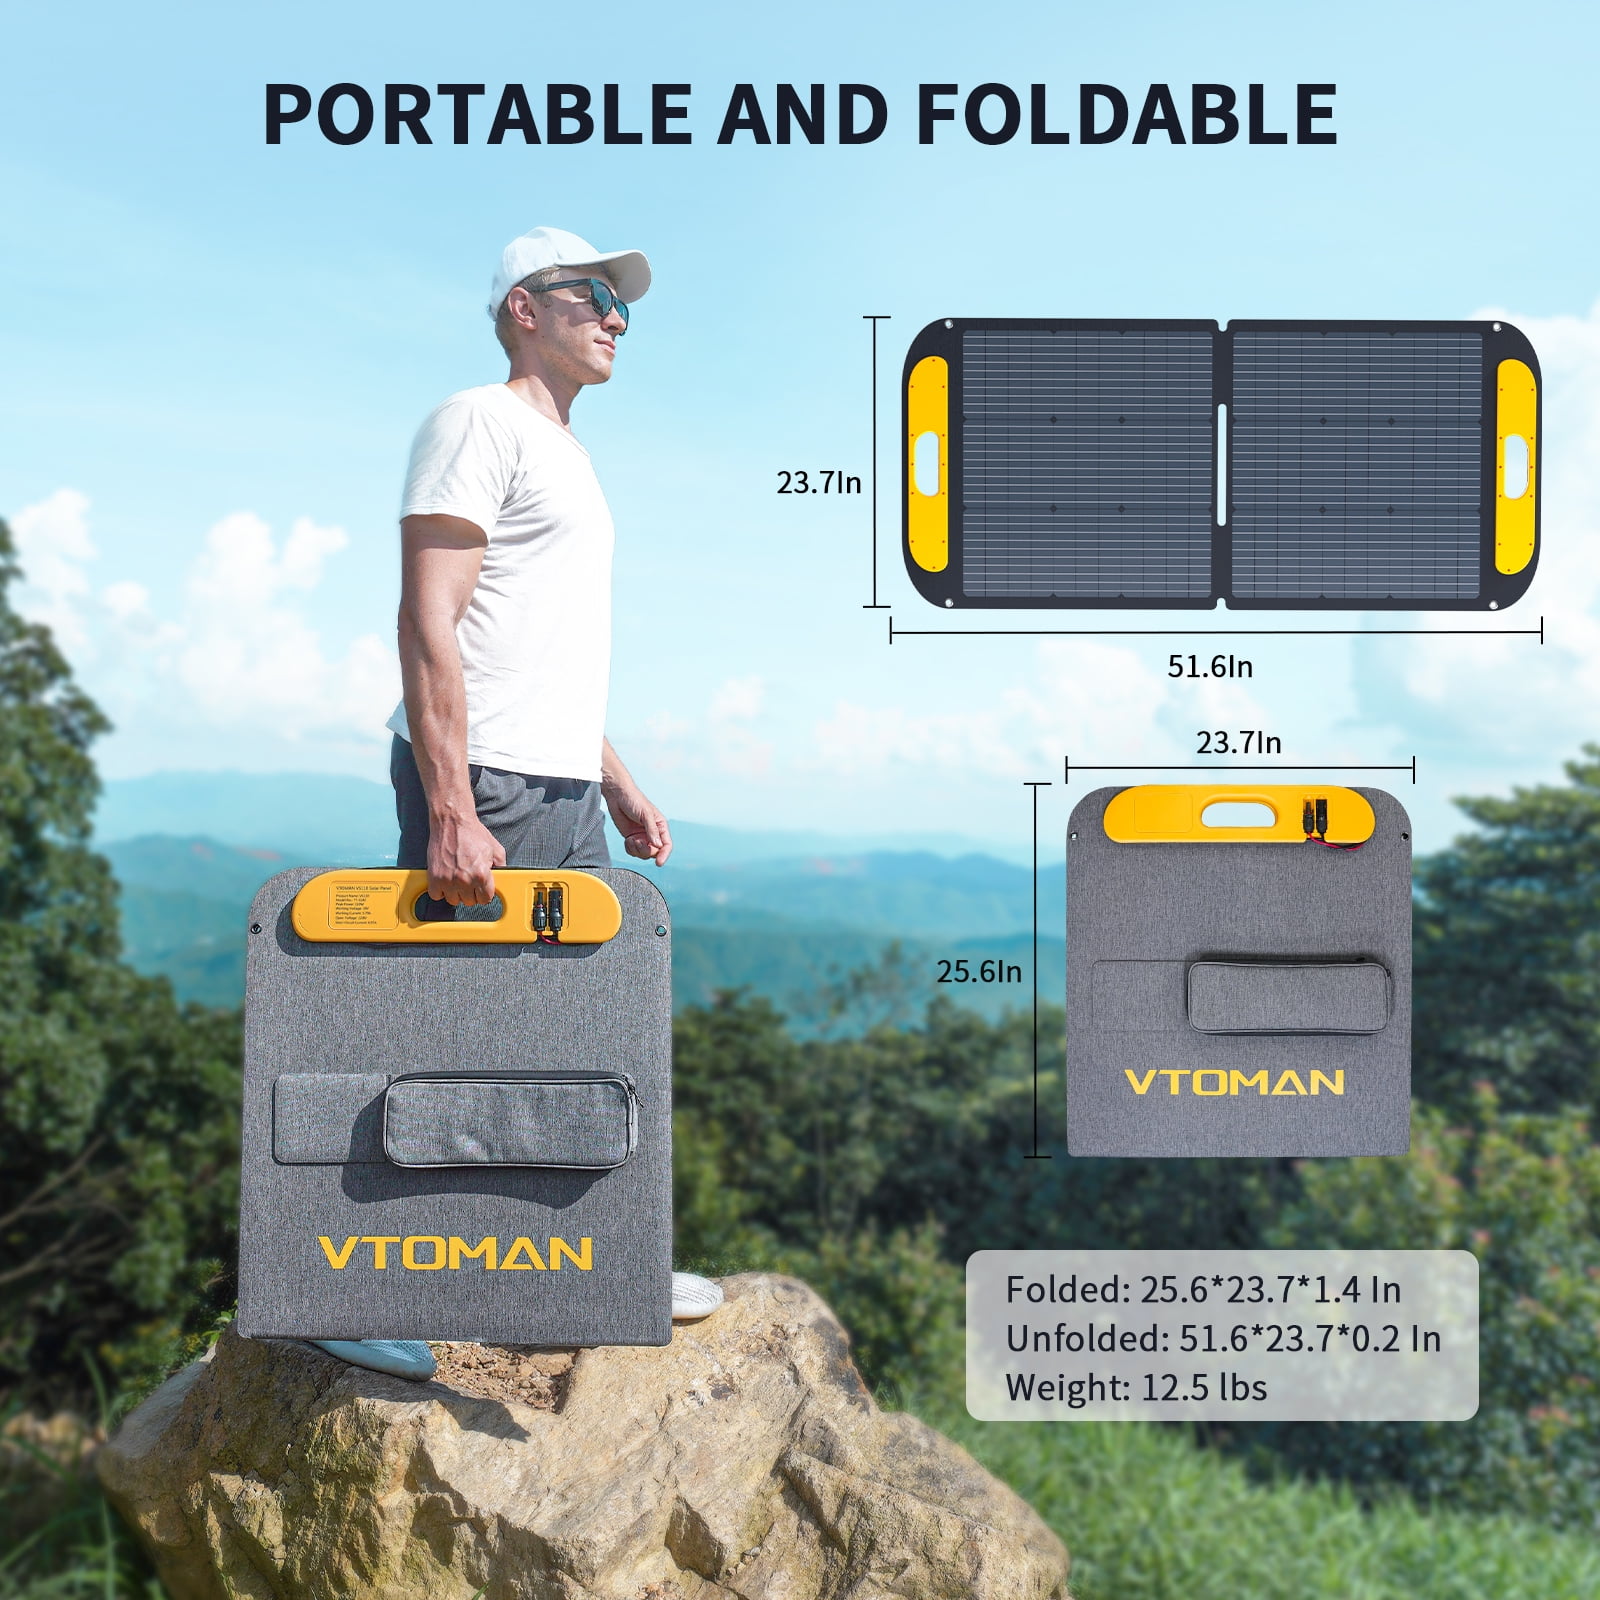  VTOMAN Jump 600X Solar Generator with Panels Included,  600W/299Wh Durable LiFePO4 Portable Power Station with 600W Constant-Power,  Regulated 12V DC, PD 60W Type-C for Home & RV/Van Camping(2 Parcels) 